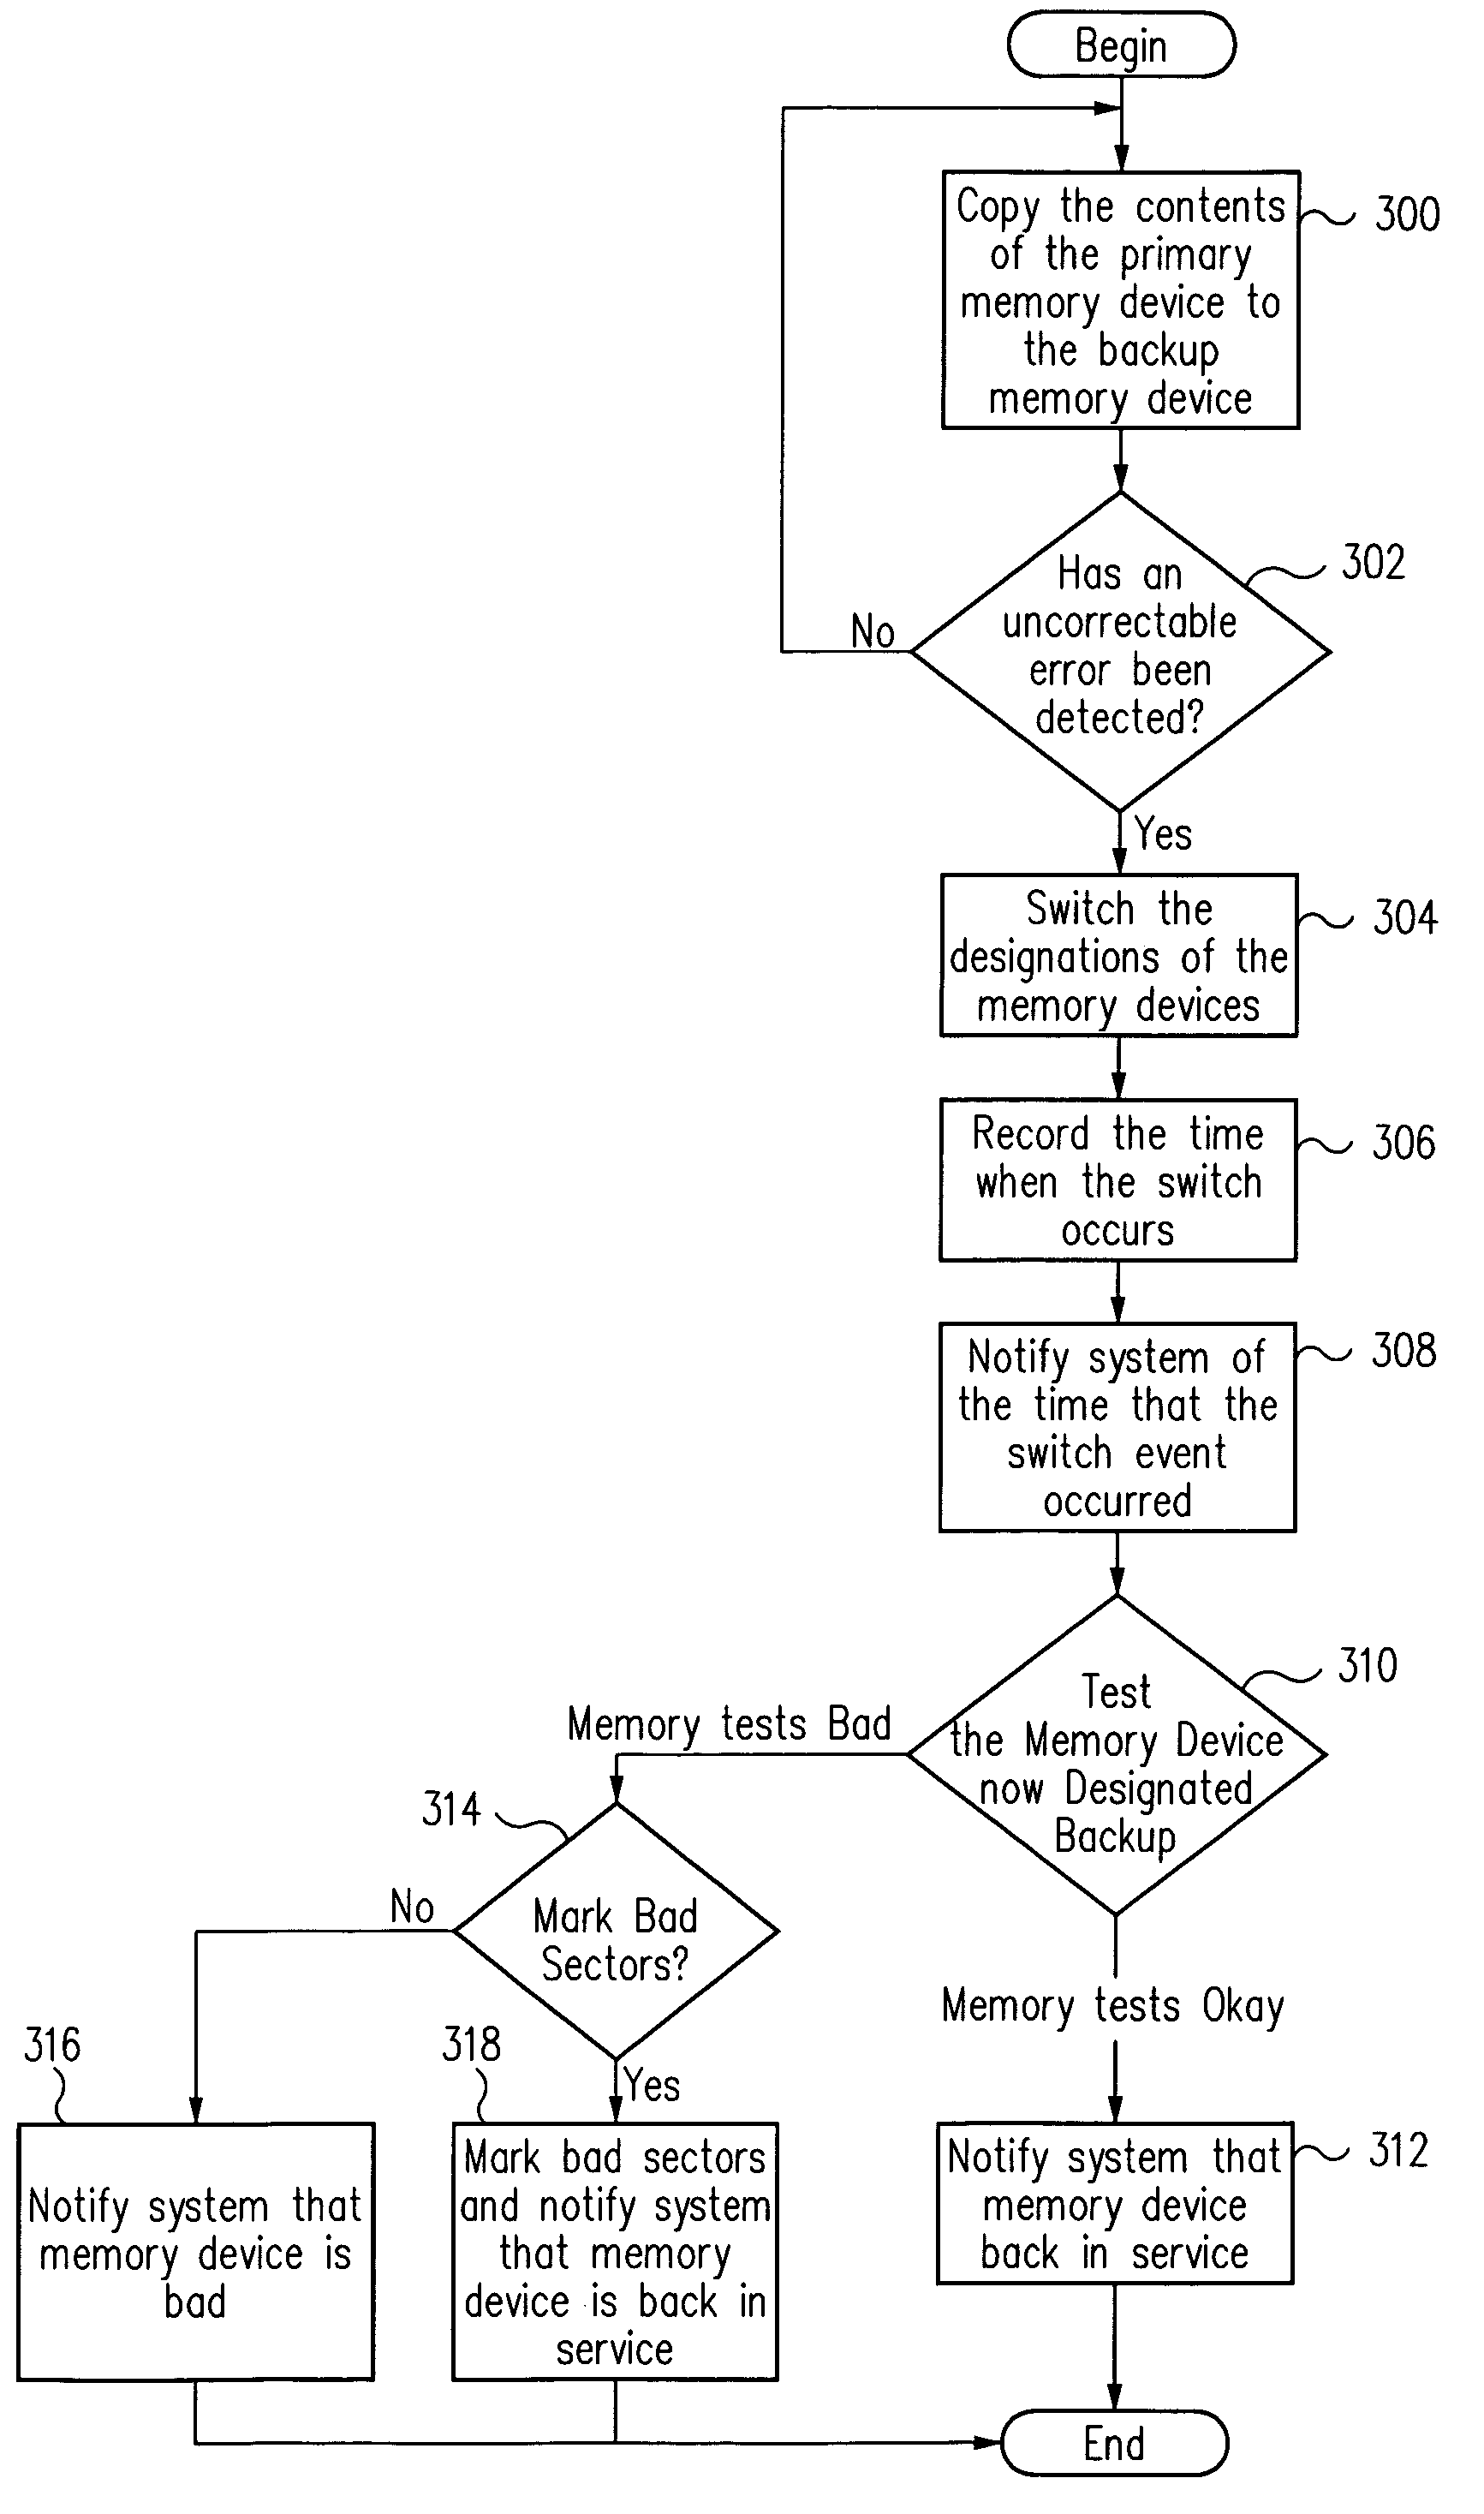 Method and apparatus for memory redundancy and recovery from uncorrectable errors